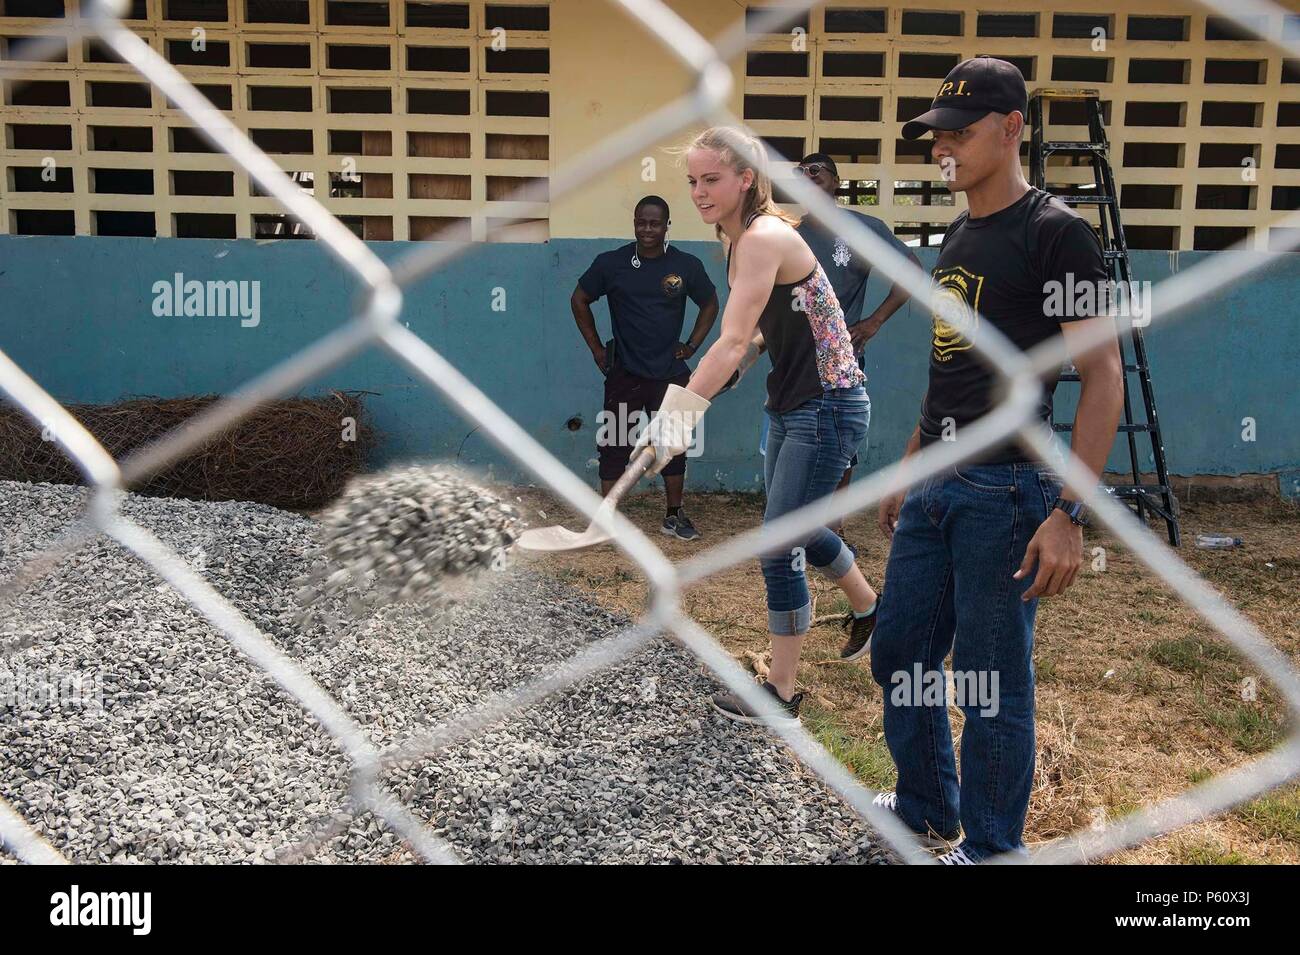 160402-N-MD297-052 VERACRUZ, Panama (April 2, 2016) Damage Controlman Fireman Apprentice Mikia Bollinger, assigned to the Arleigh Burke-class guided-missile destroyer USS Lassen (DDG 82) shovels gravel at the Cosecha de Amistad School in Veracruz, Panama during a community service event with members of PanamaÕs Presidential Protective Service (SPI). Lassen is currently underway in support of Operation Martillo, a joint operation with the U.S. Coast Guard and partner nations within the 4th Fleet area of responsibility. Operation Martillo is being led by Joint Interagency Task Force South, in su Stock Photo